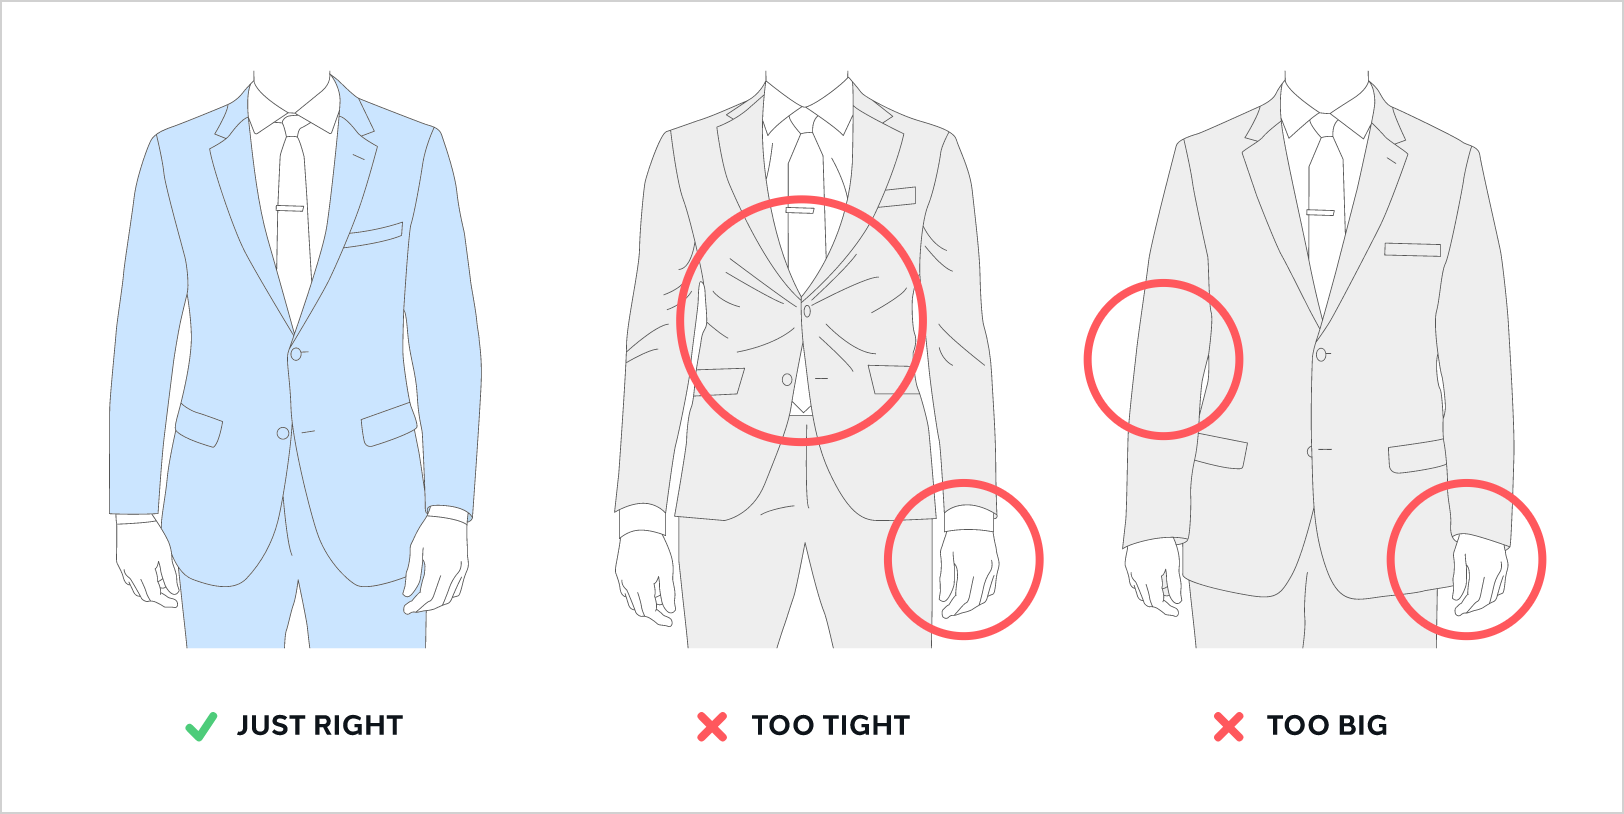 A well-fitted jacket doesn't have any pulling fabric, allows the top button to close comfortably, and isn't too baggy or long.